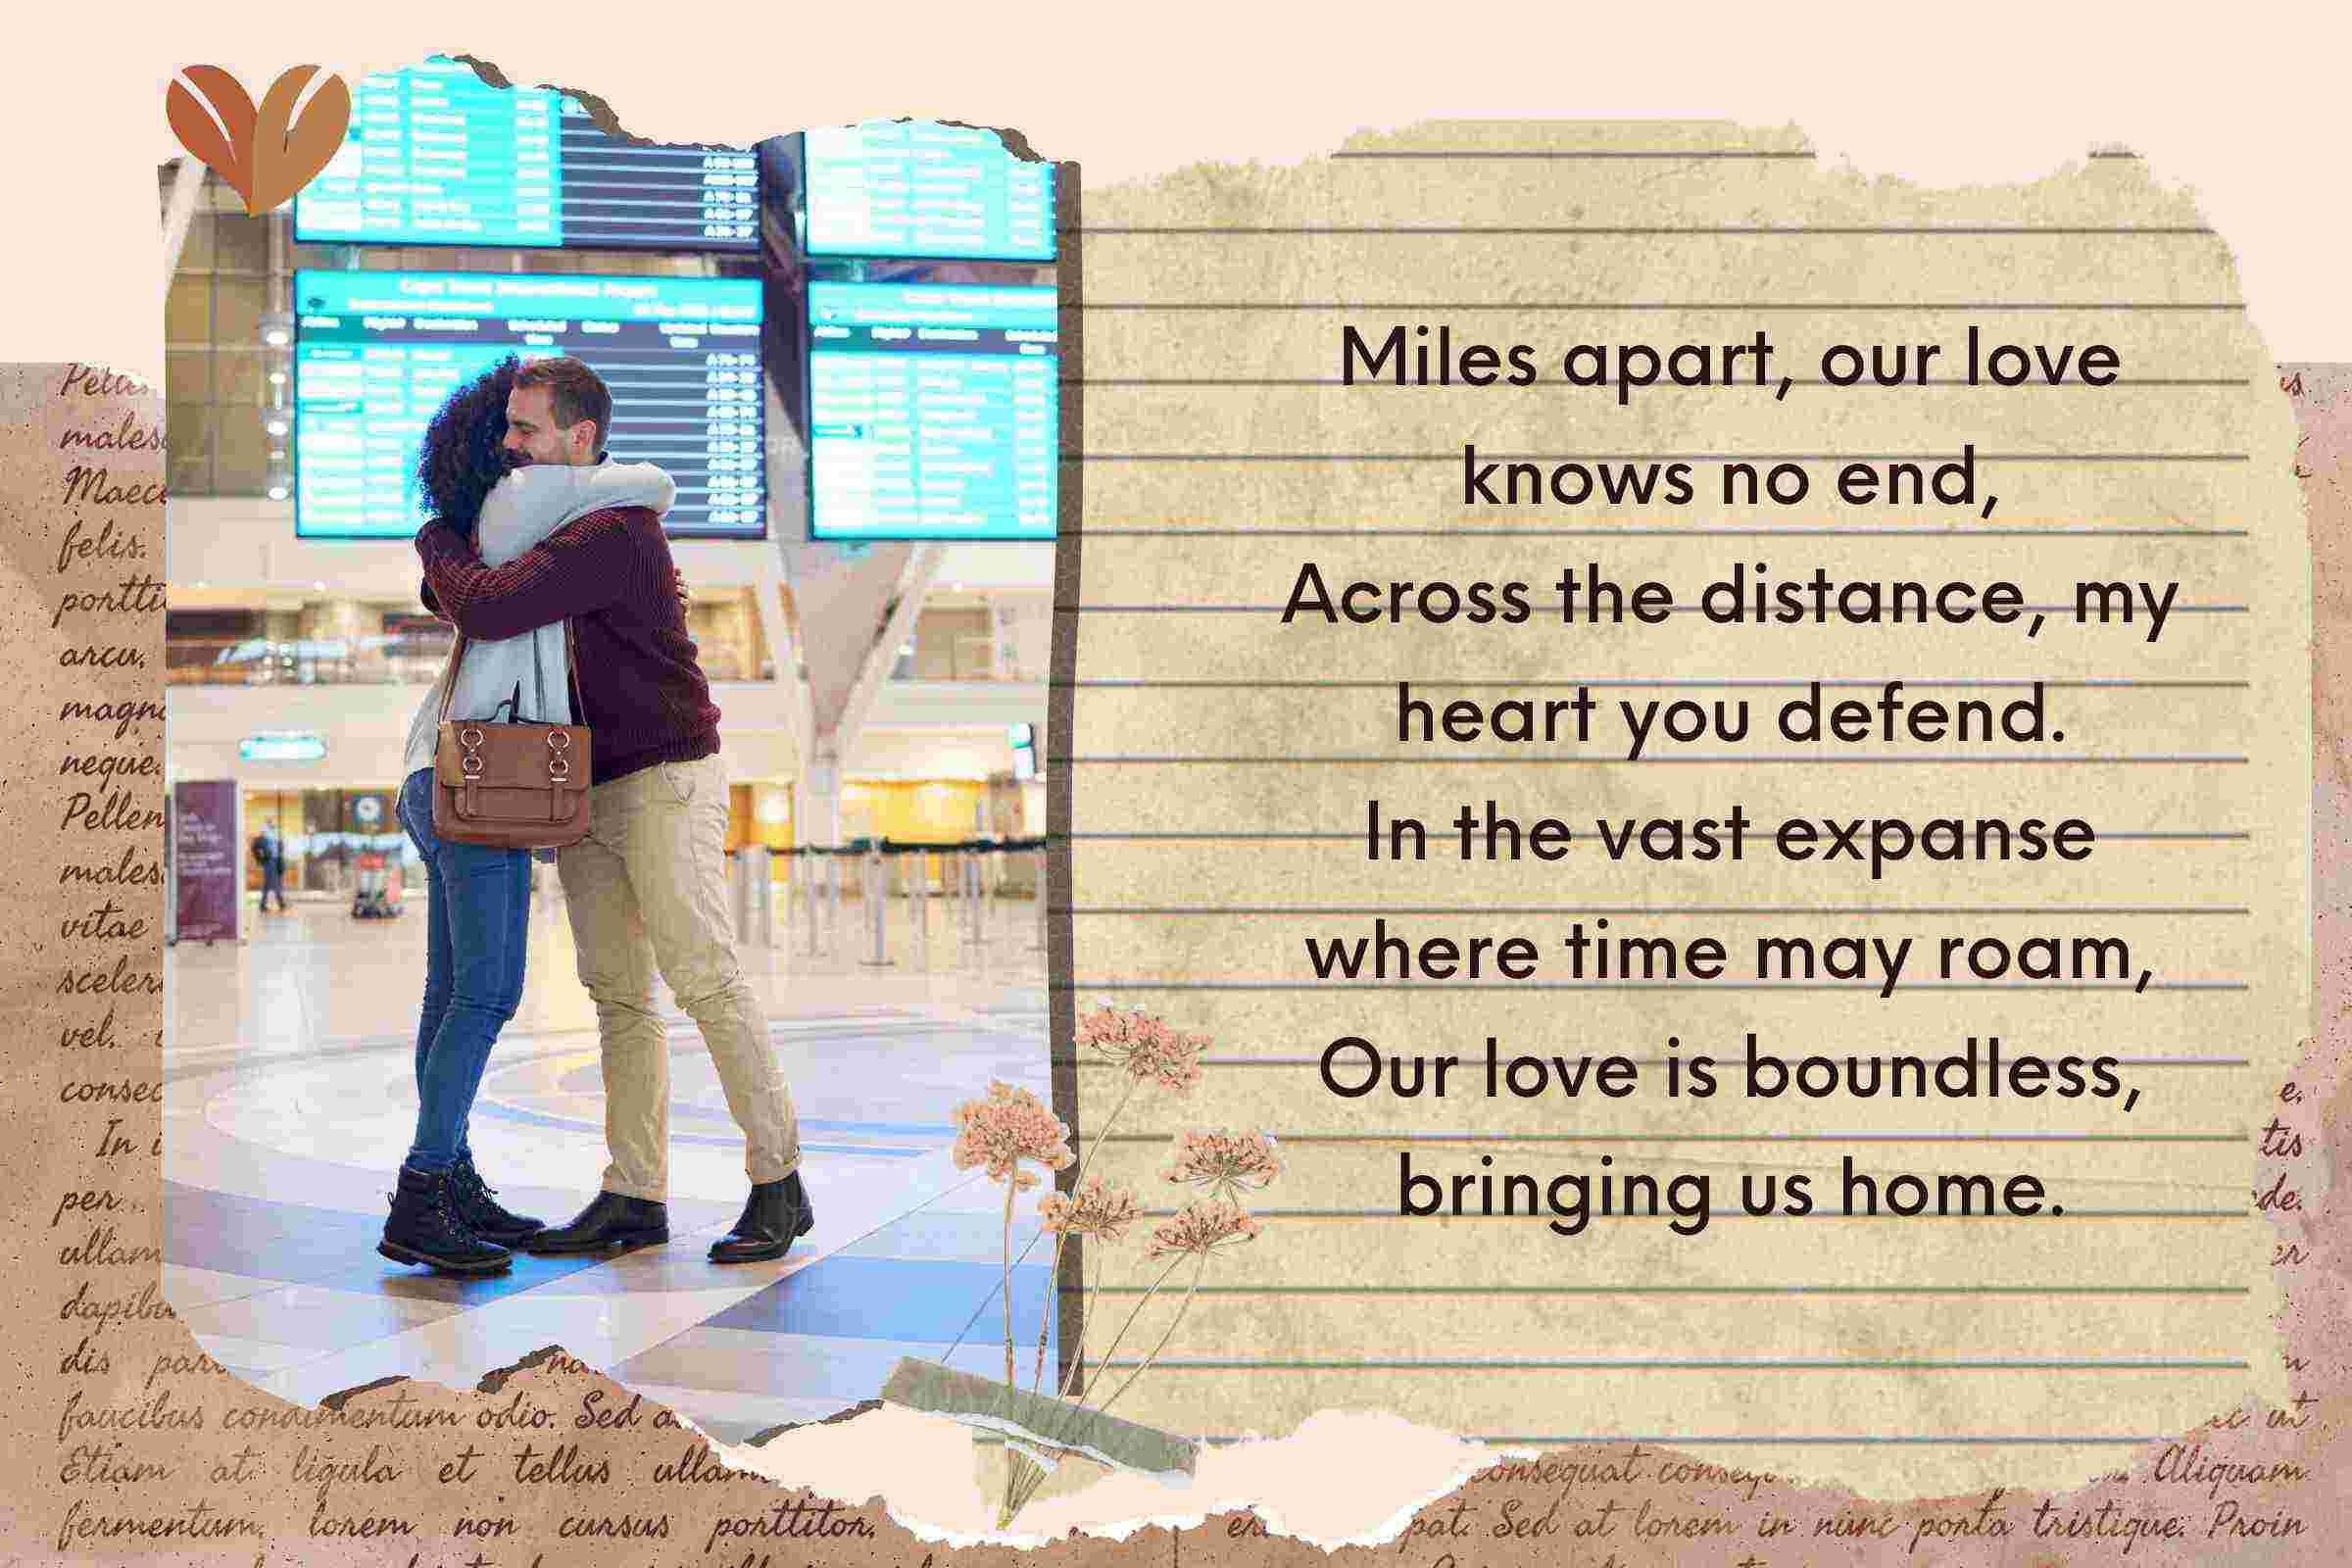 Miles apart, our love knows no end